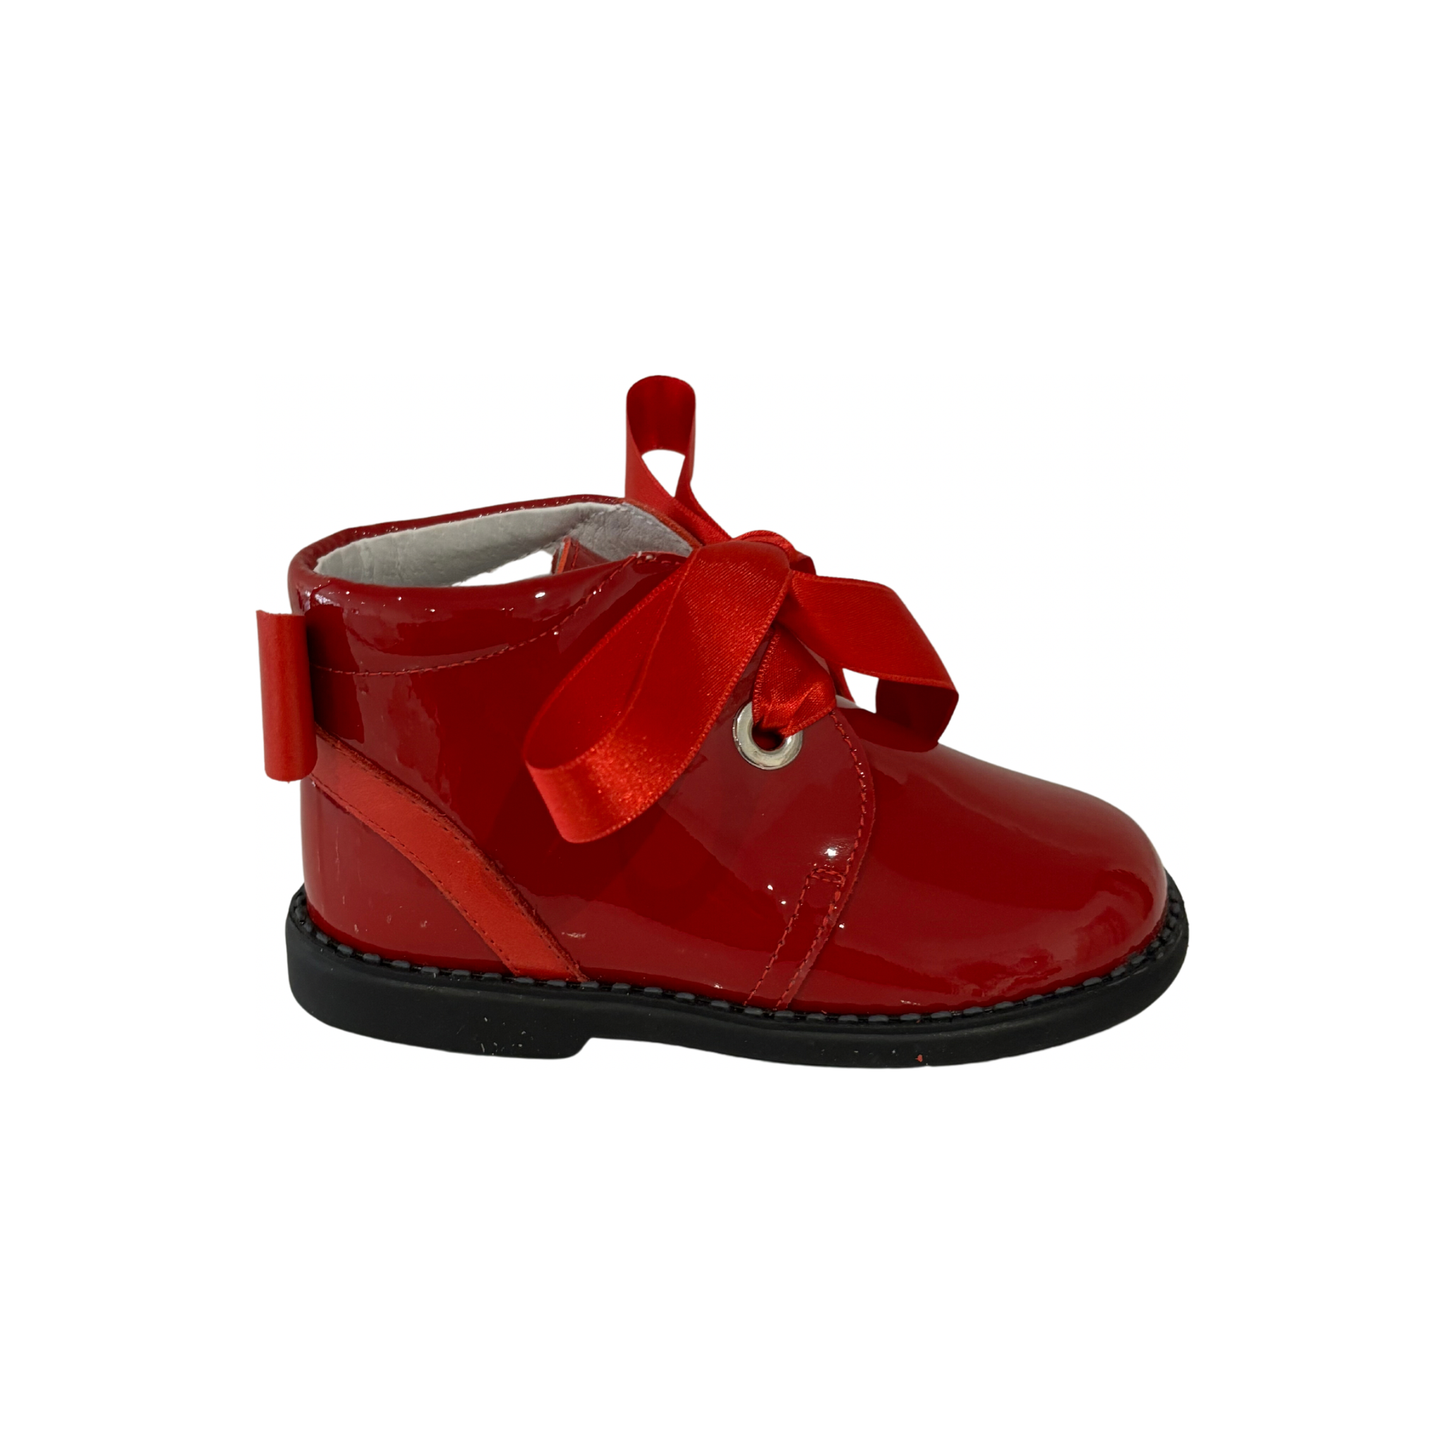 Red boots for girls - Andanines